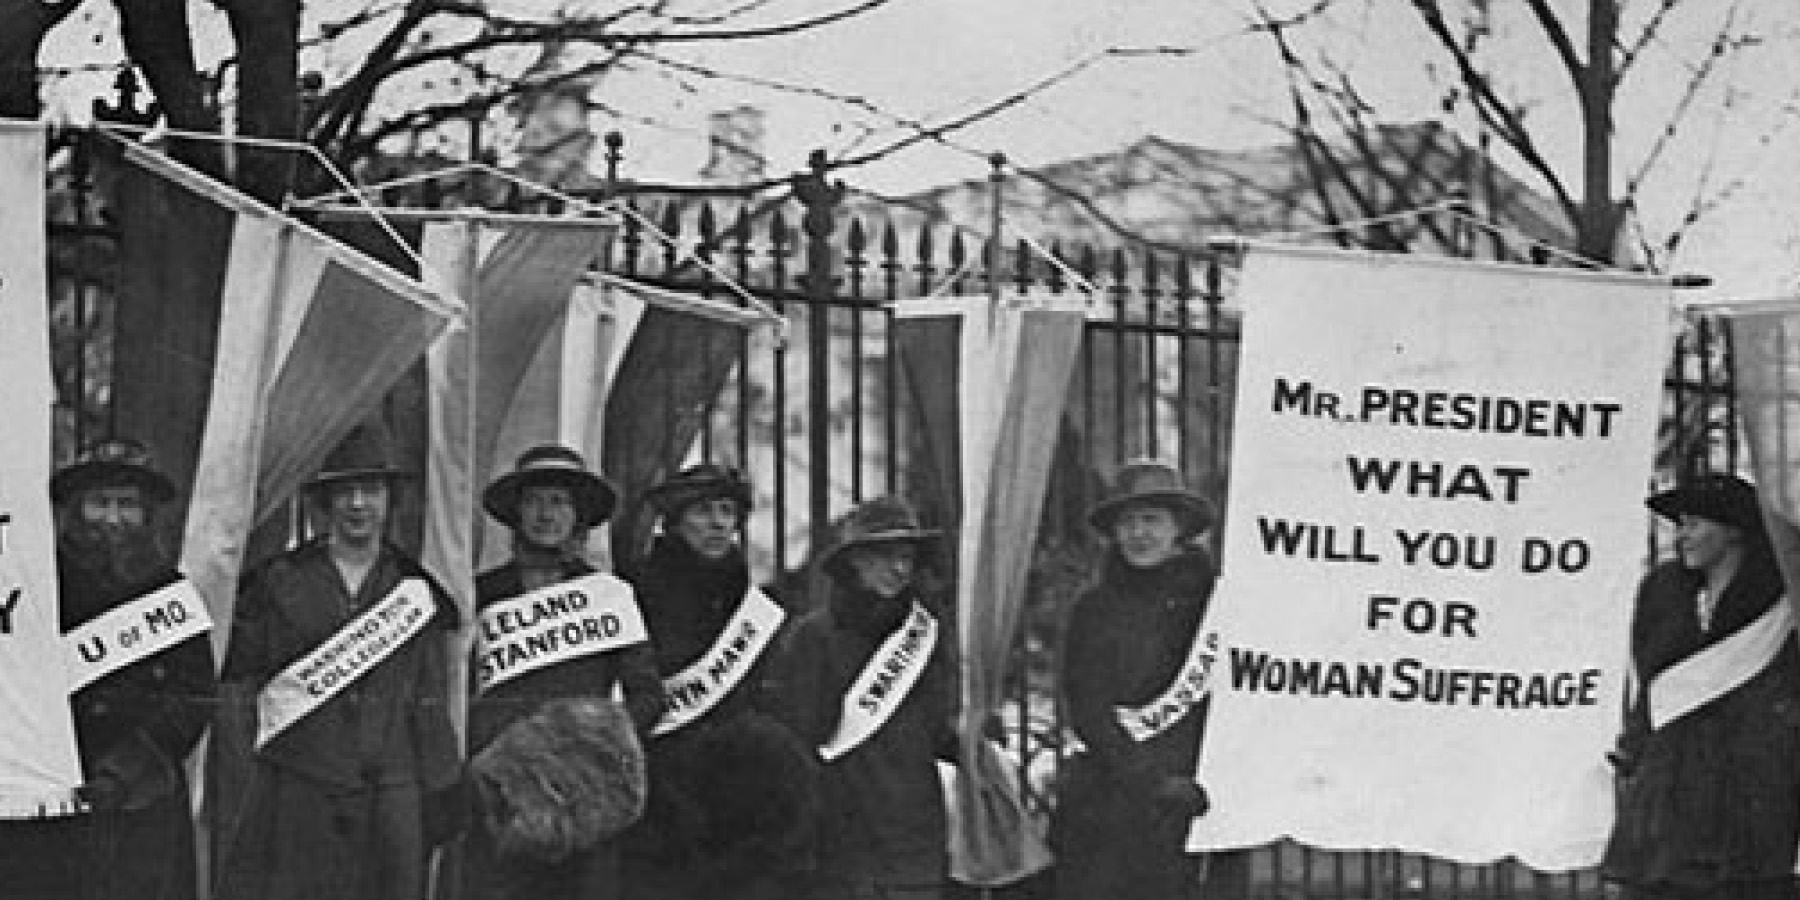 Film & Lecture Series: "Soothing the 'Savage Hearts of Man': Women's Suffrage and Rural Missouri"